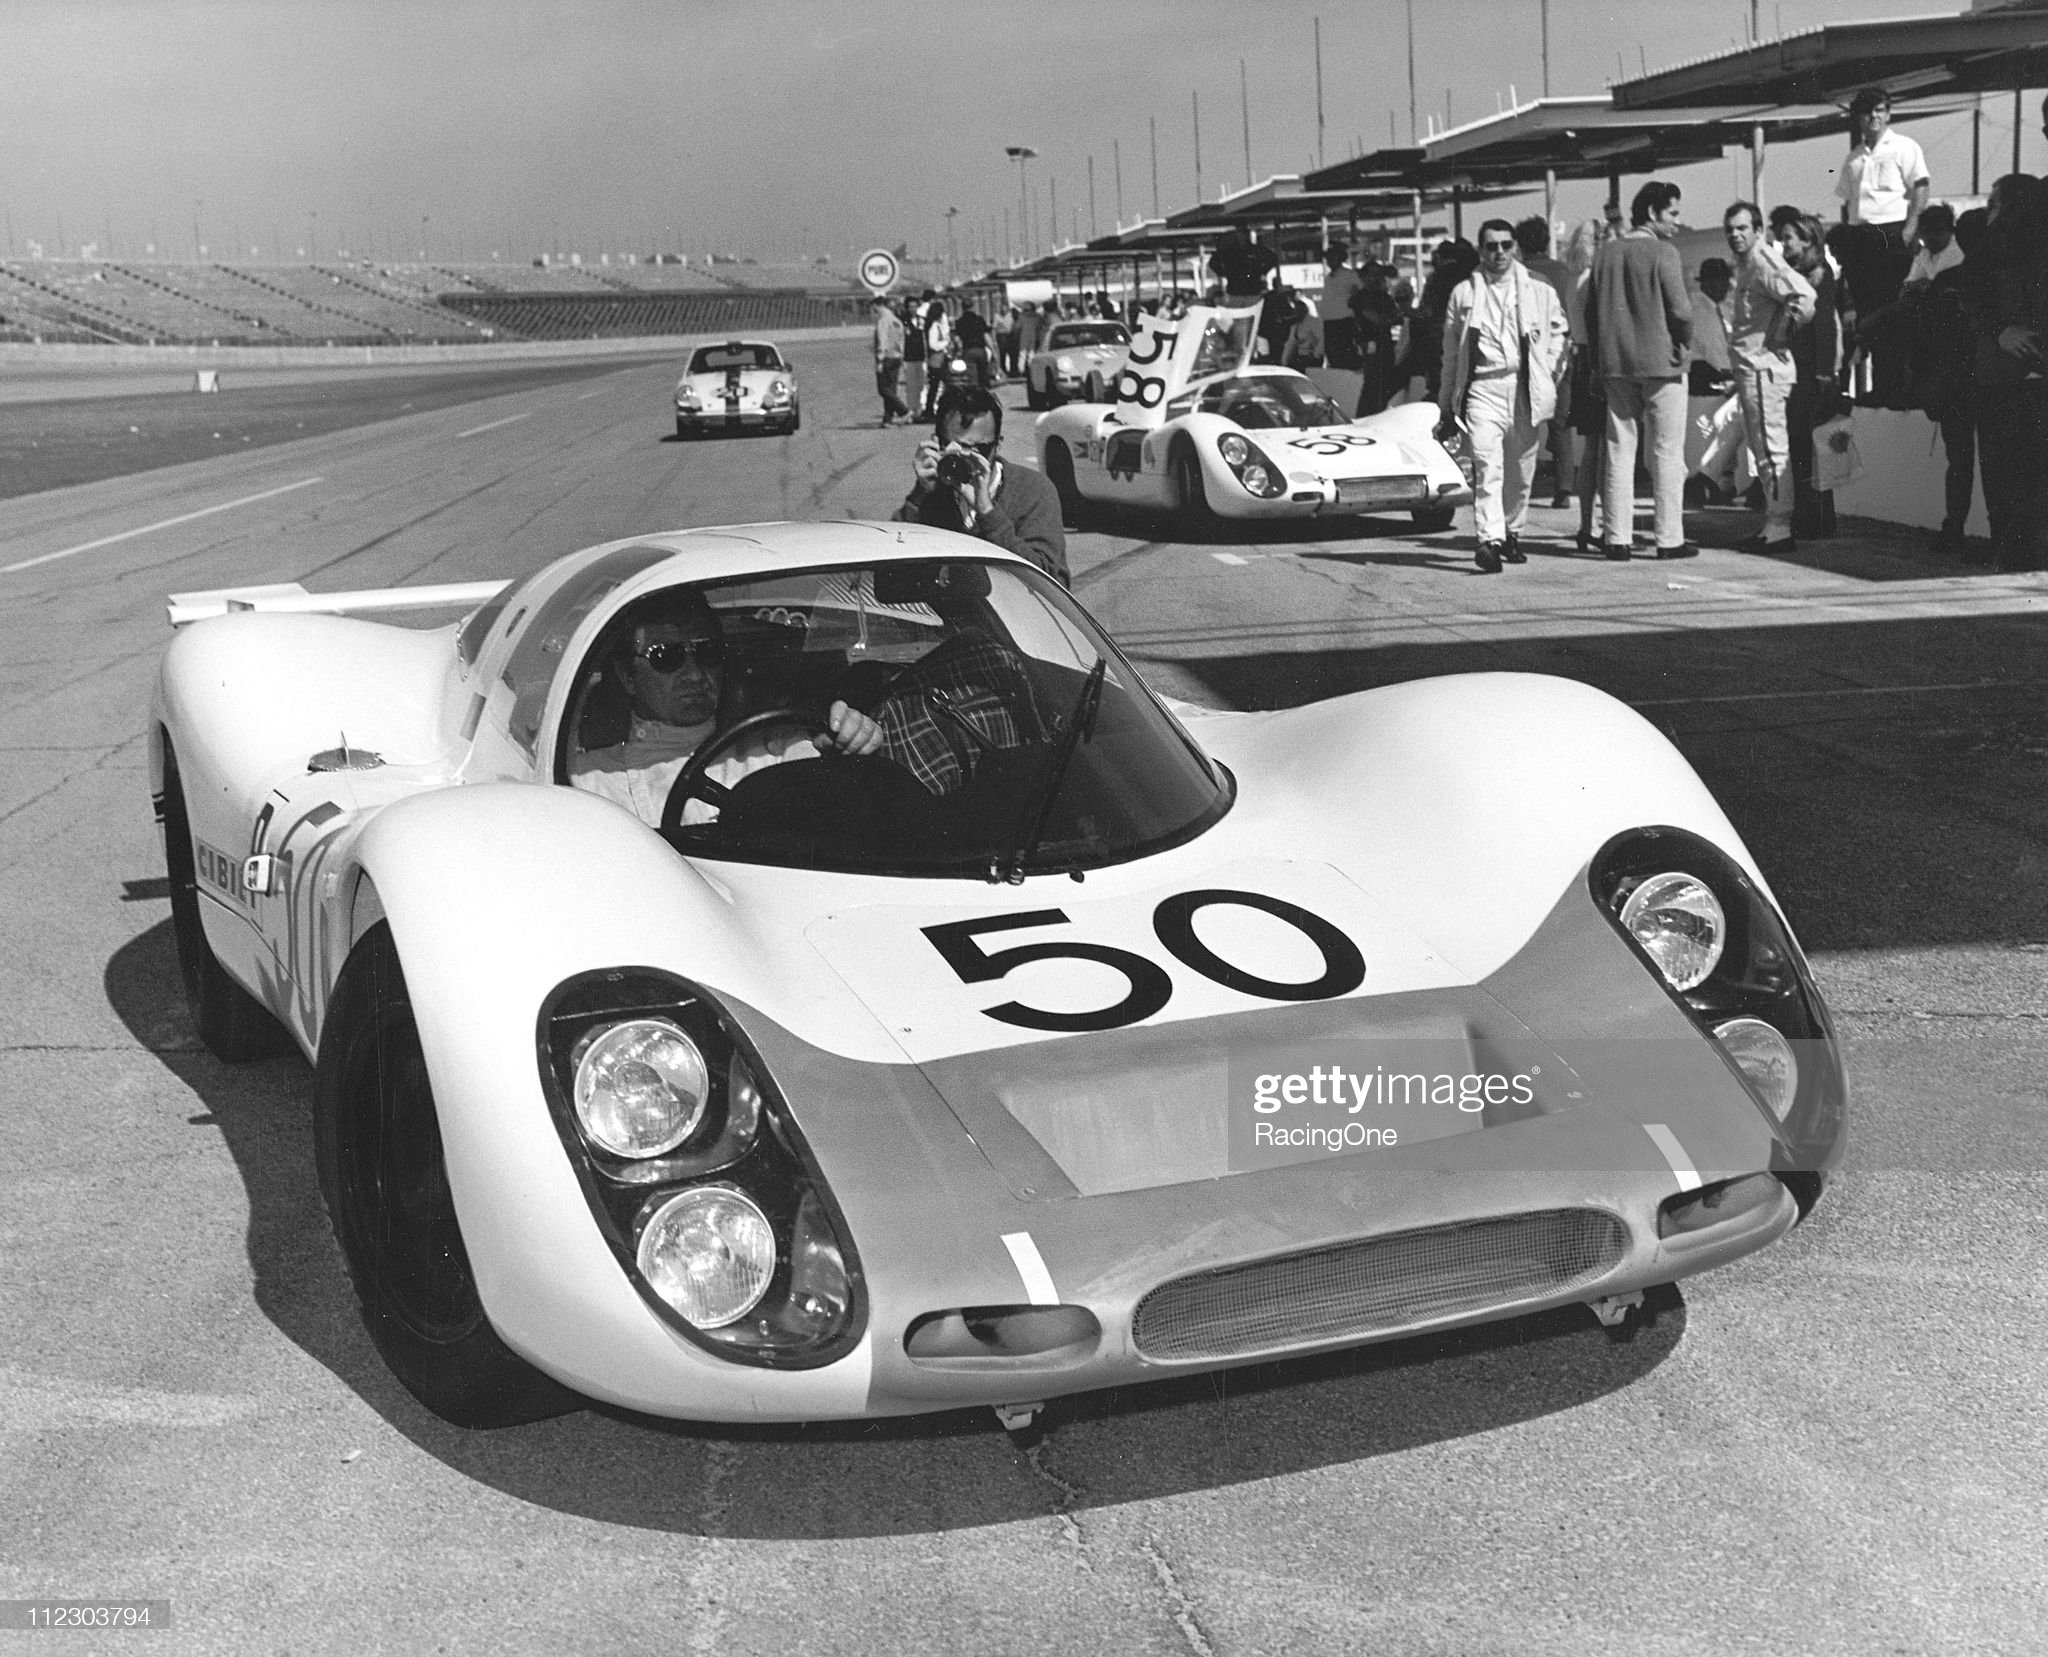 The Porsche 908L of Jo Siffert and Hans Hermann gets ready for the start of the 24 Hours of Daytona at Daytona International Speedway on February 01, 1969. 